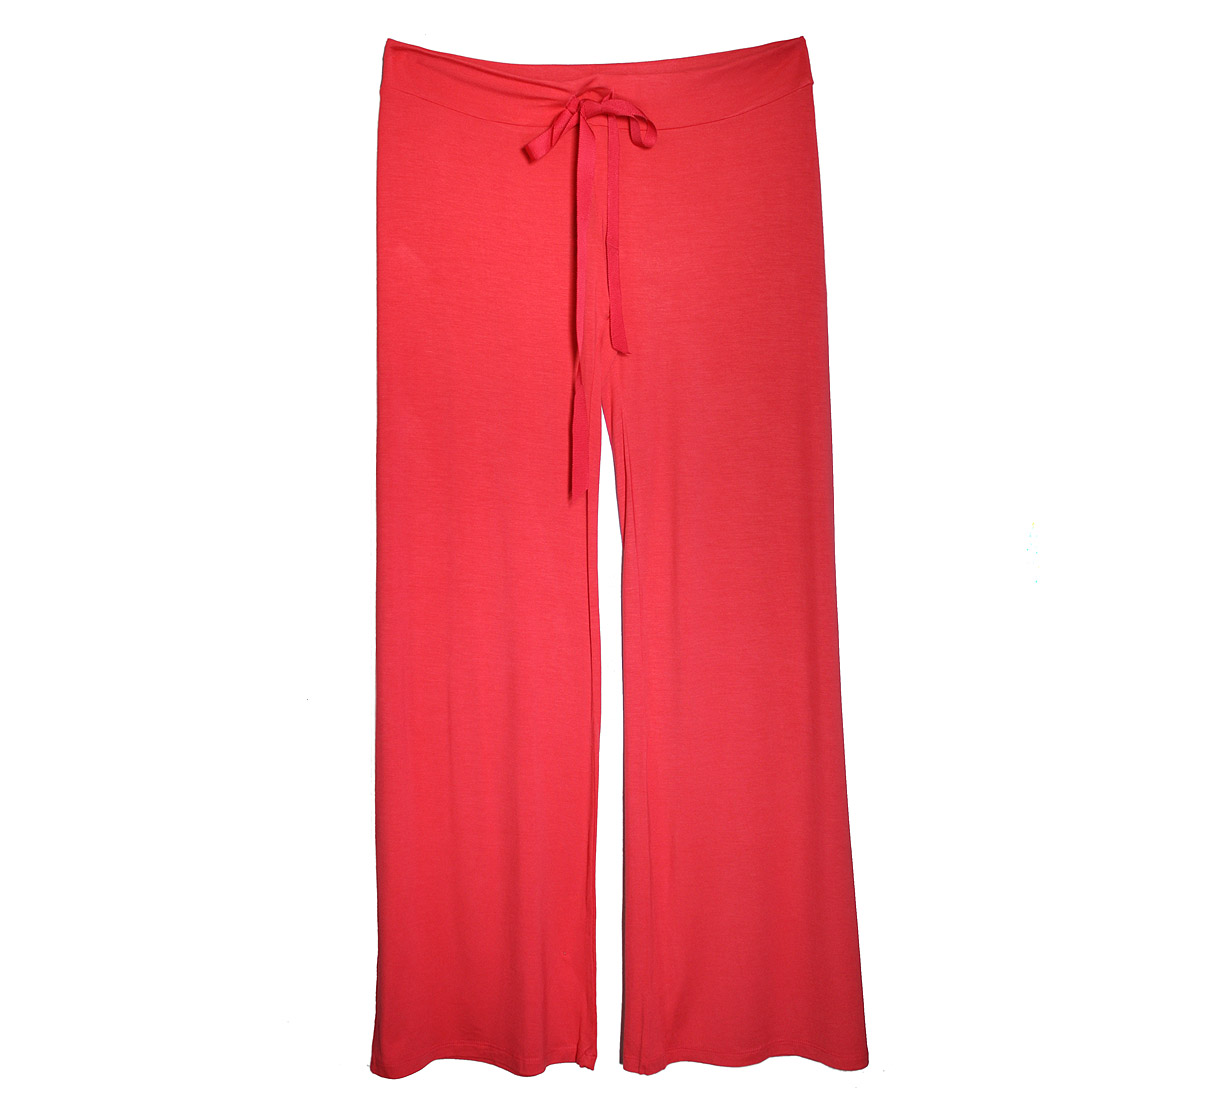 Matchplay Coral Lounge Pant | Luxurious Jersey Knit Lounge Wear | Between the Sheets Designer Sleepwear